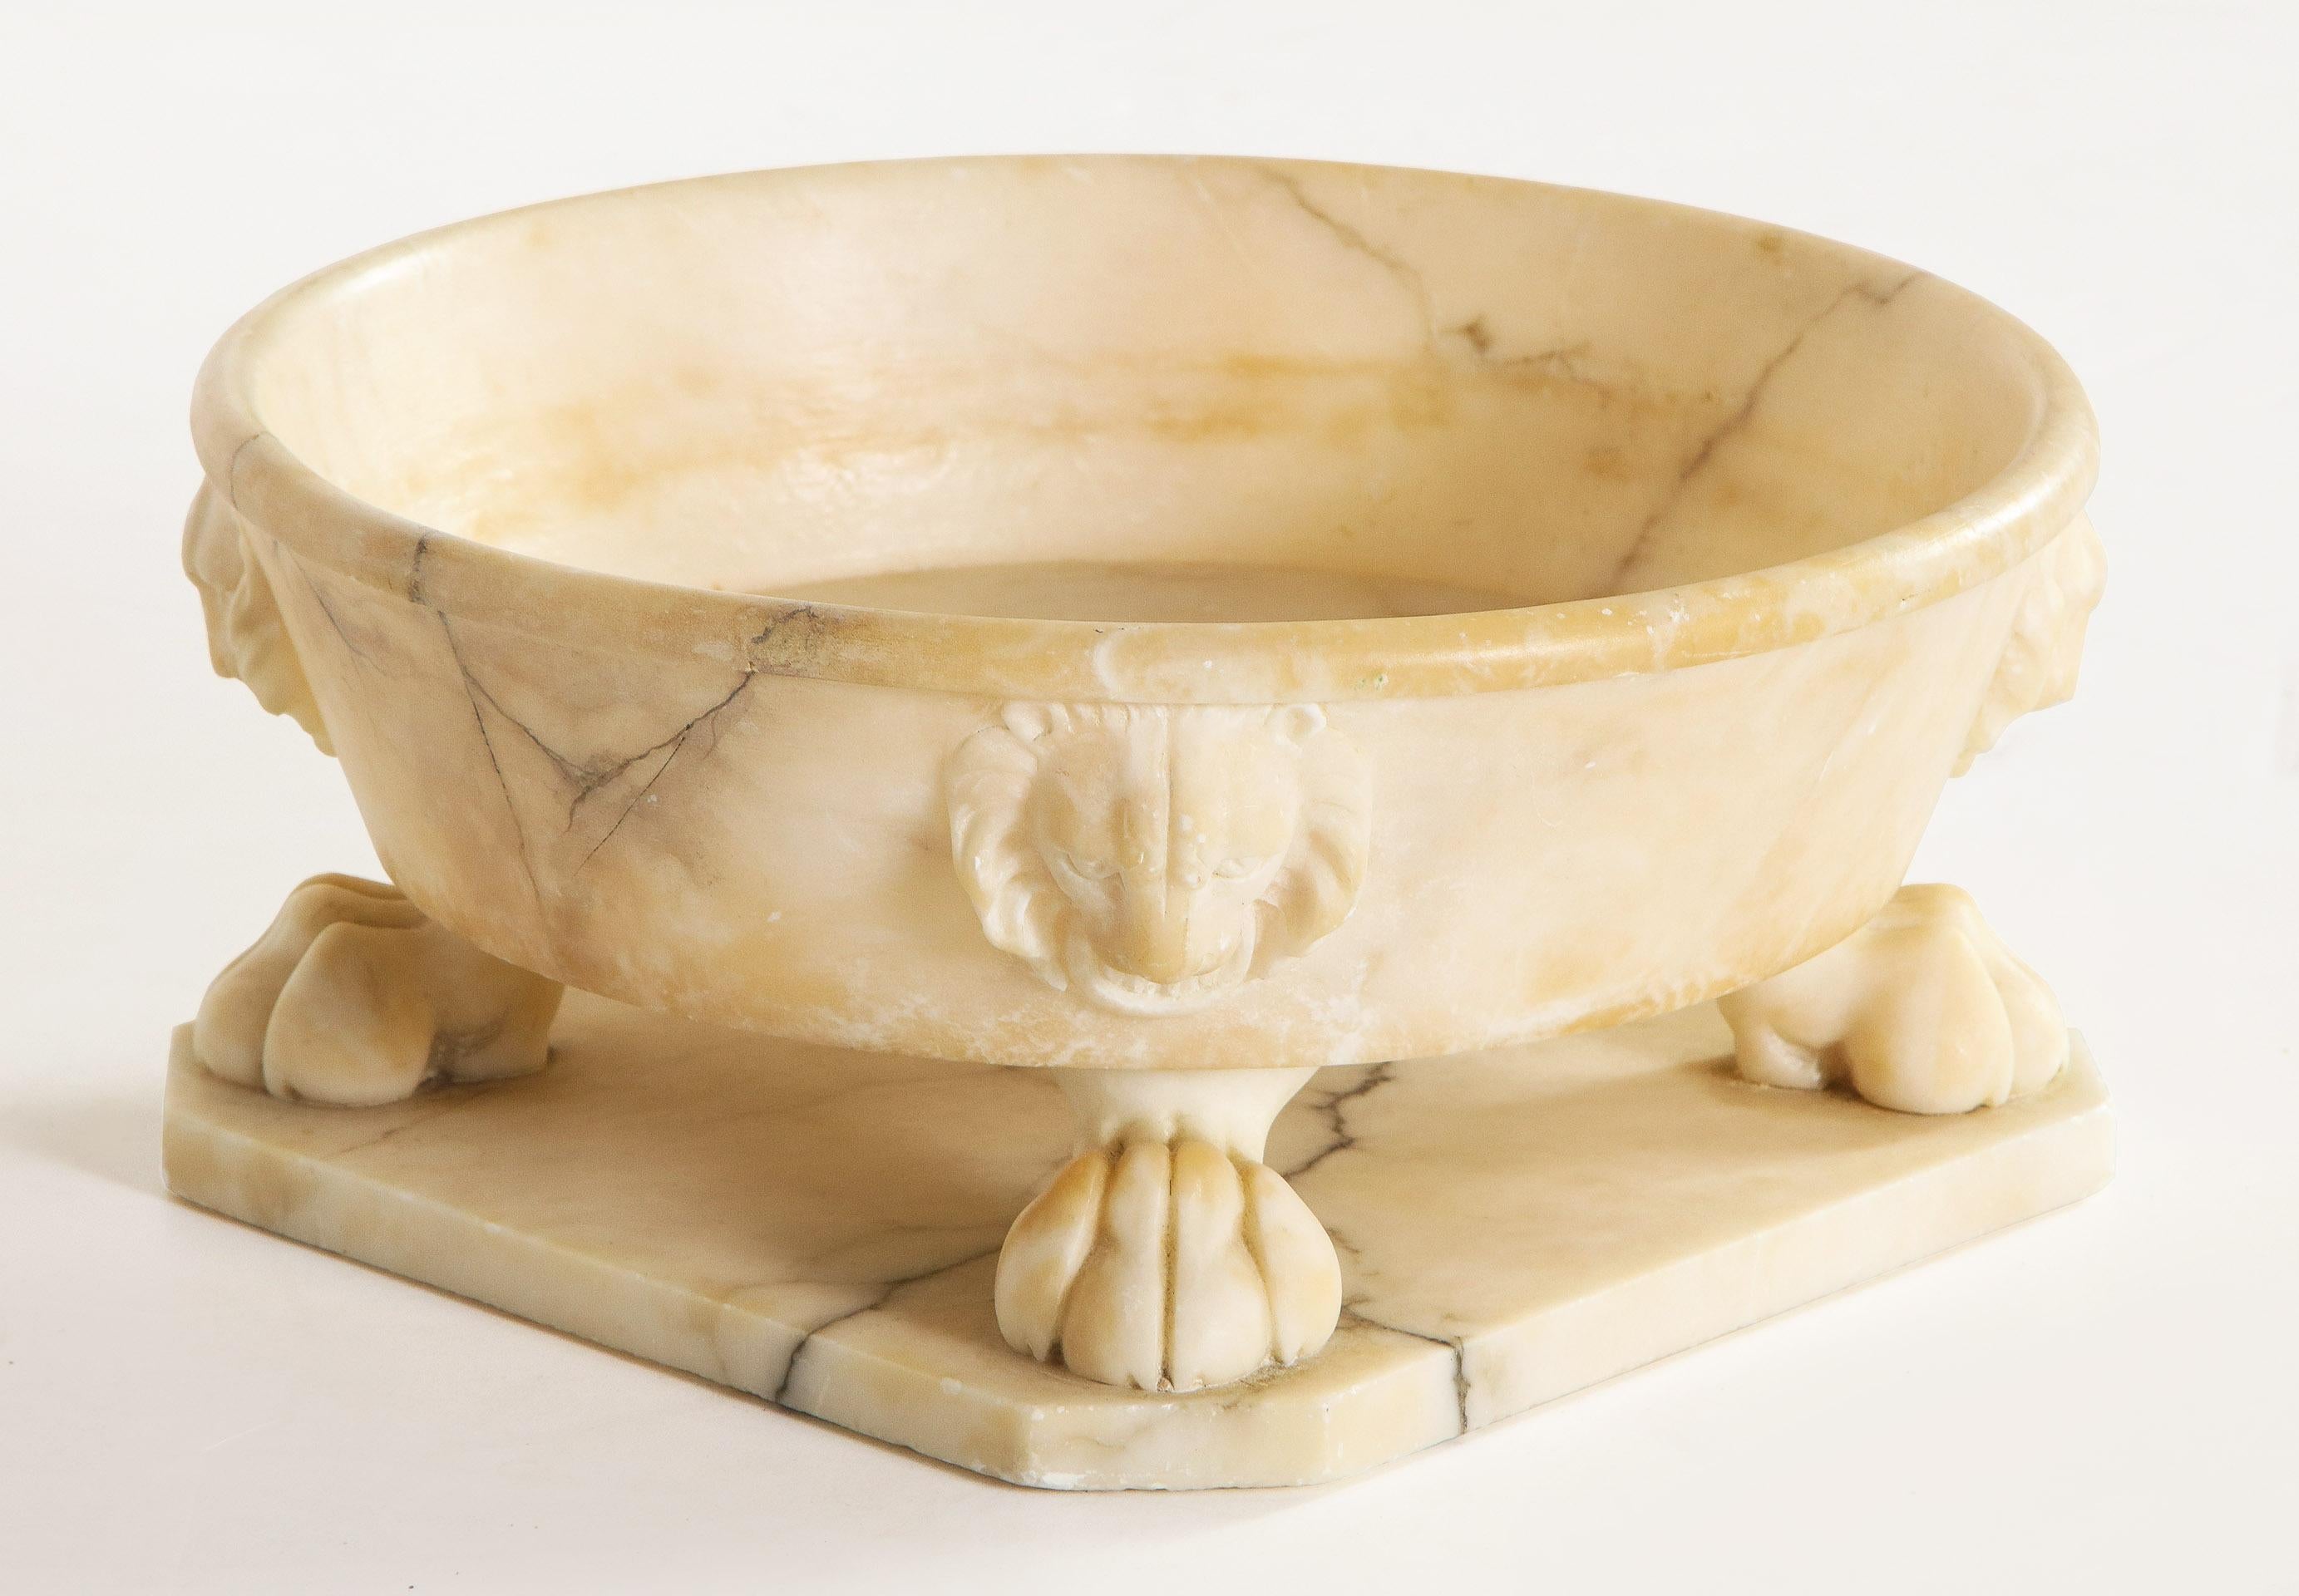 Neoclassic style alabaster bowl

The round alabaster bowl with lions heads on four sides over a corresponding lion paw all on a square base.